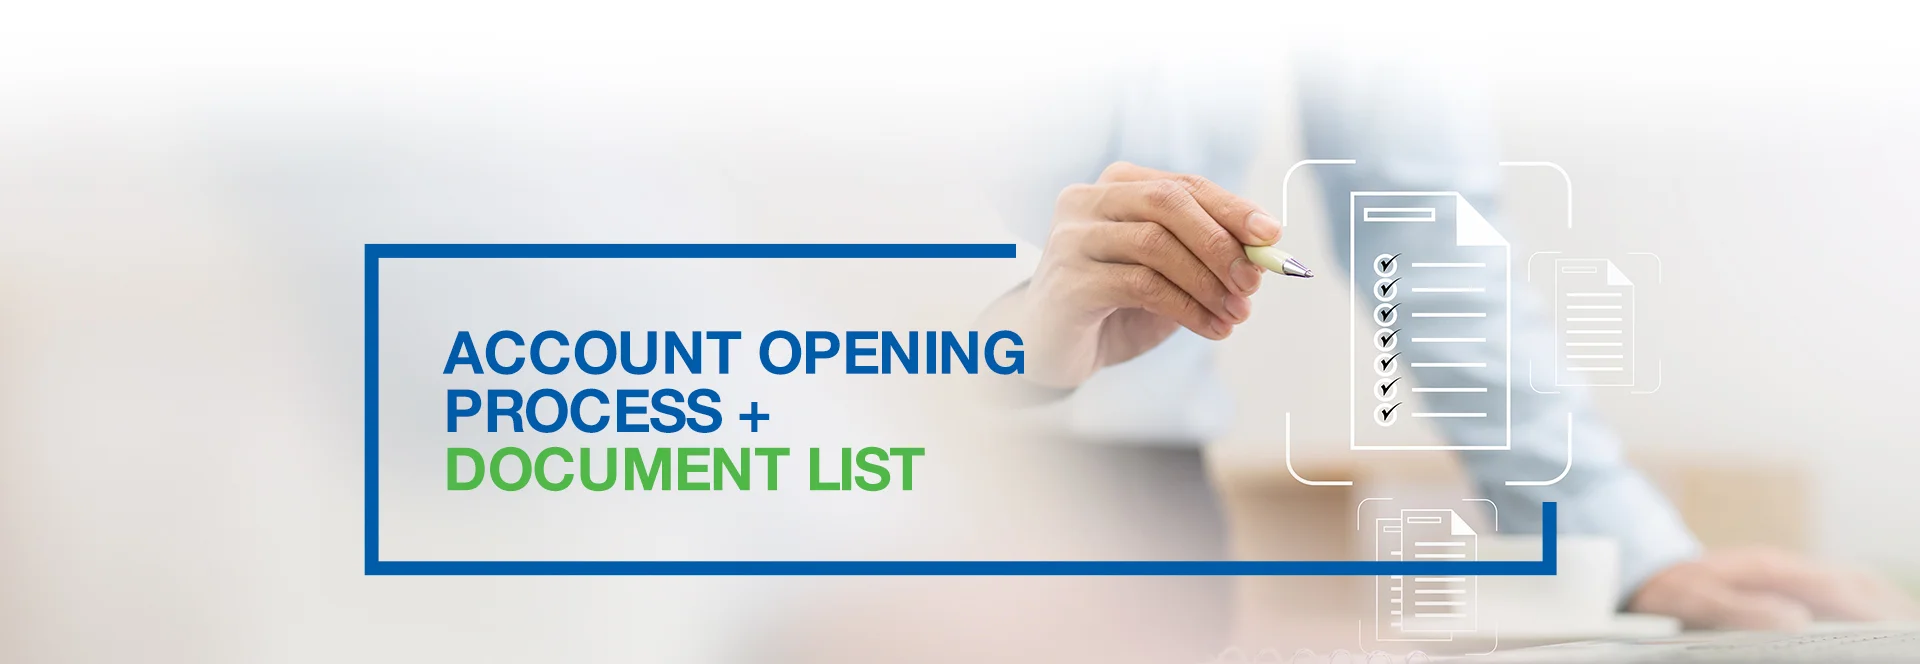 Account Opening Process and Documentary Requirements